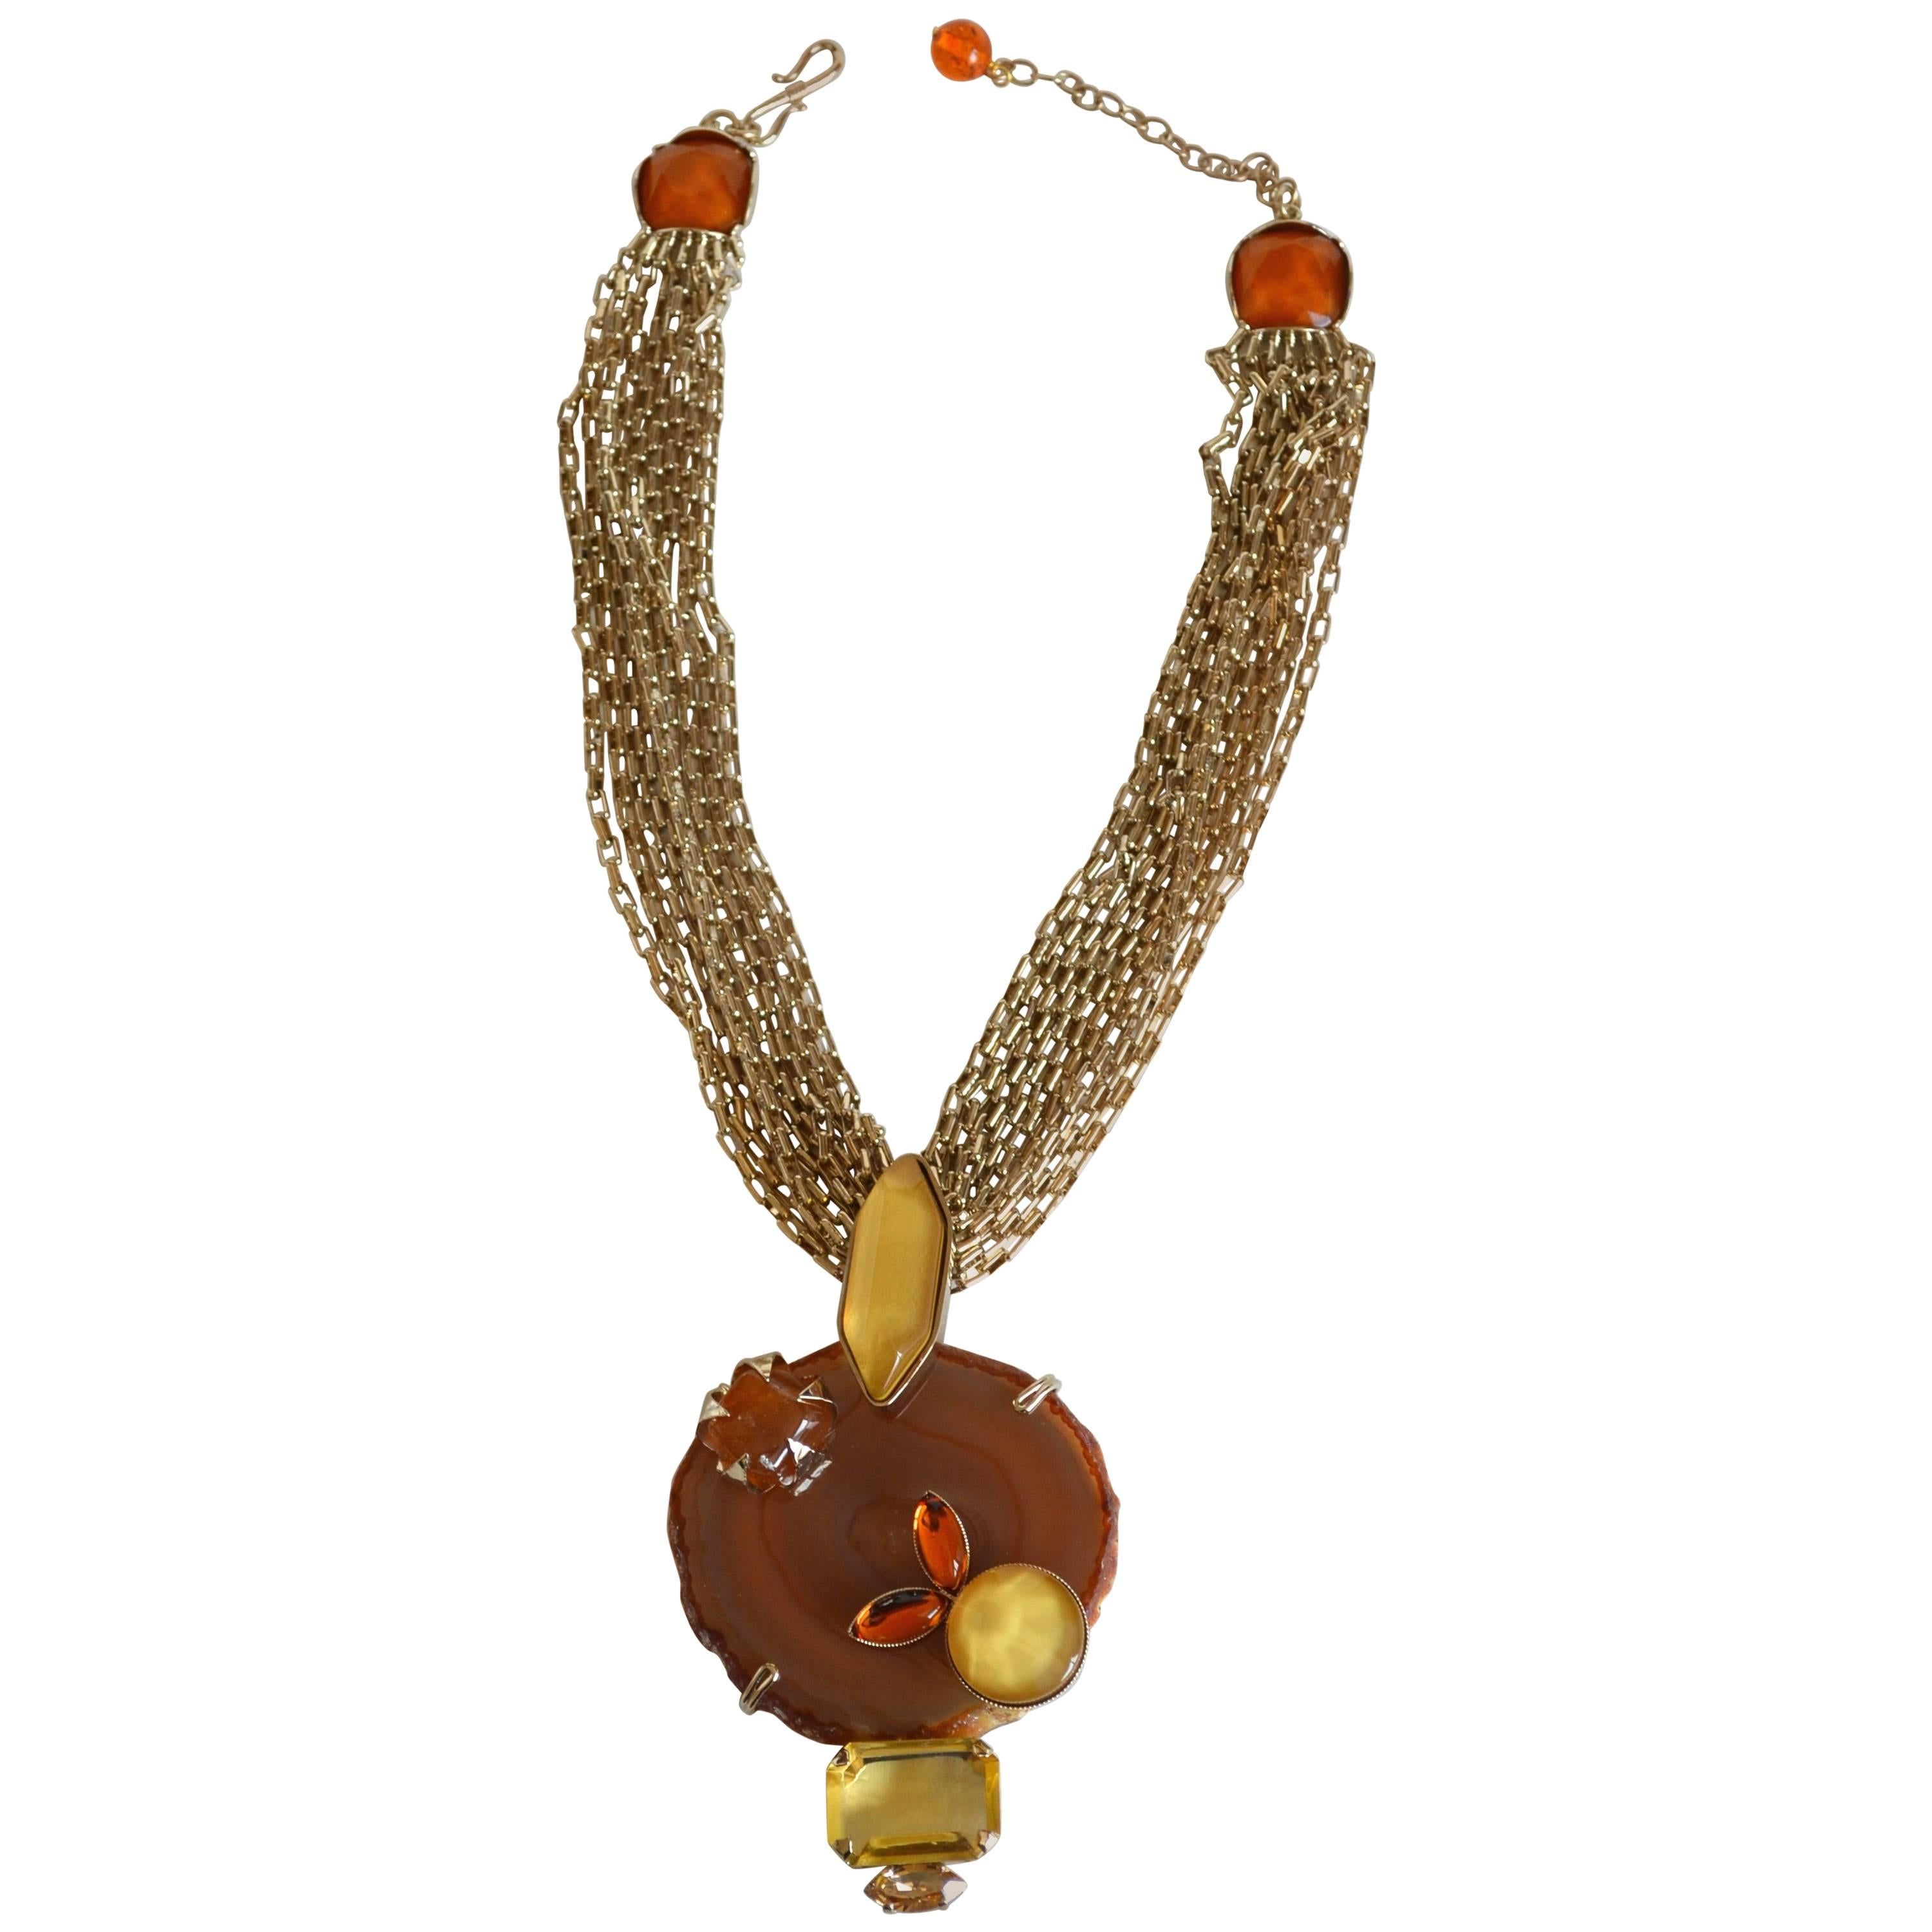 Philippe Ferrandis Agate, Glass, and Crystal Pendant Necklace